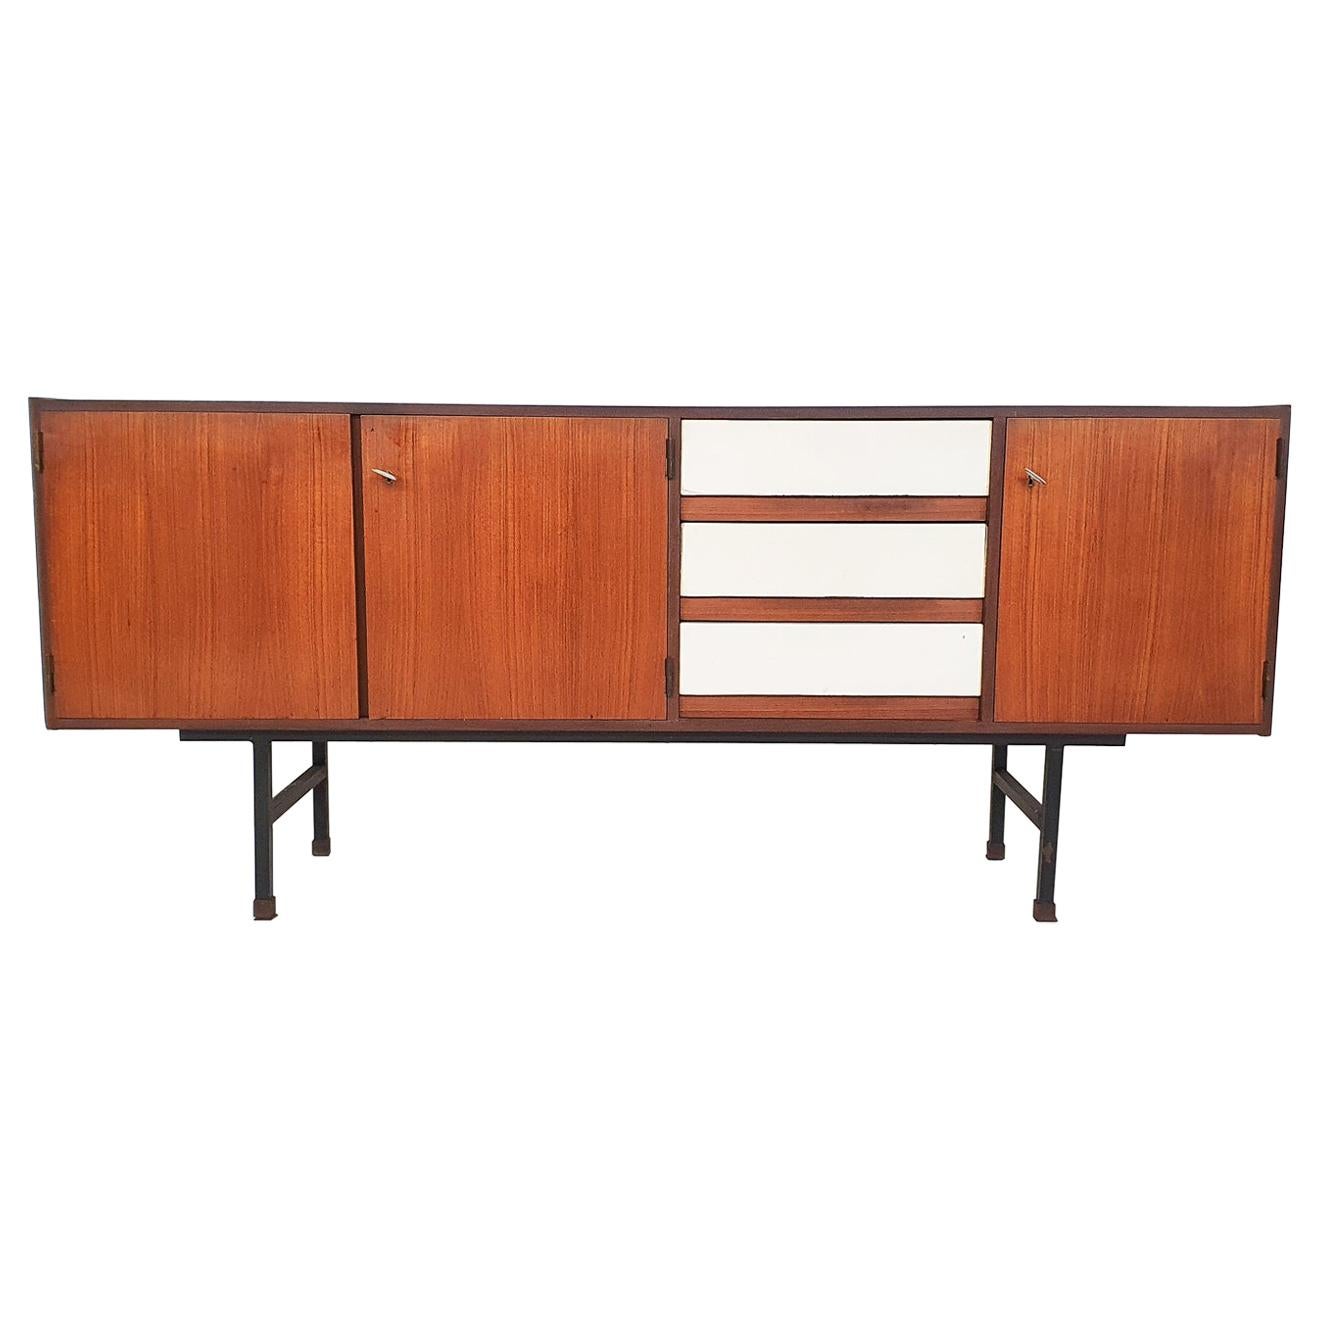 Mid-Century Modern Sideboard / Credenza by Coja, the Netherlands, 1960s